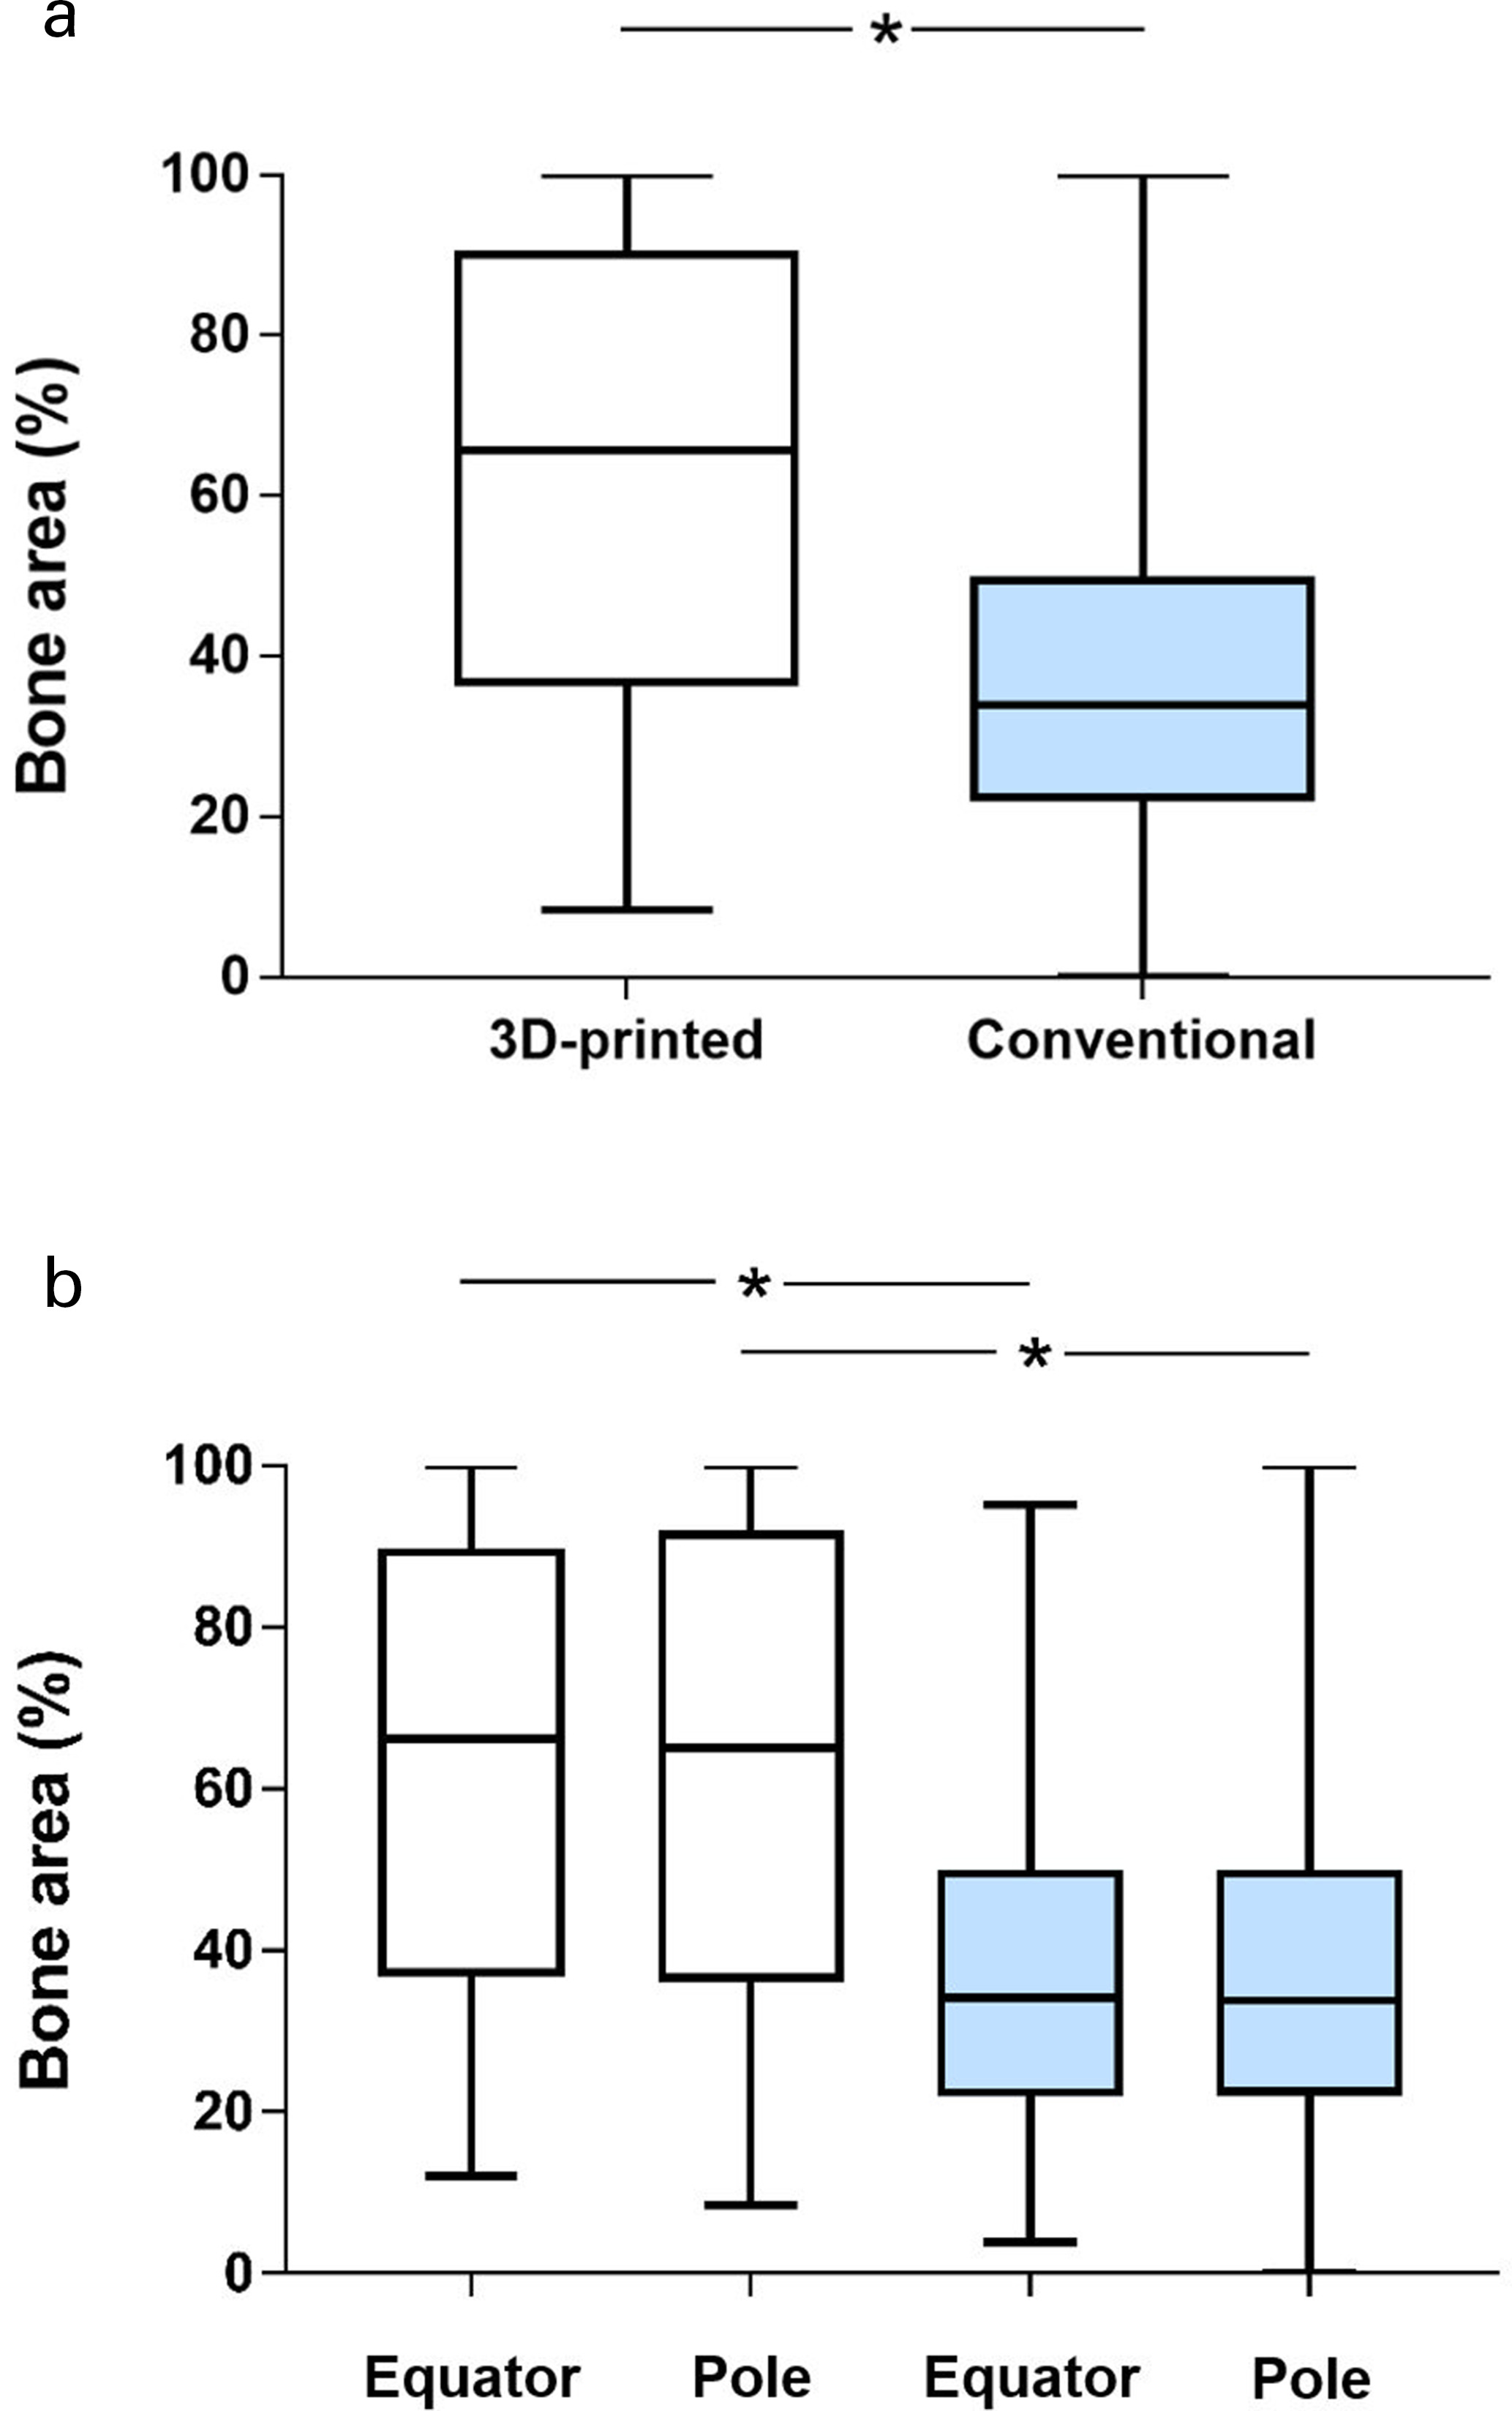 Fig. 5 
            Box plots showing the distribution of the bone in growth values in terms of bone area, calculated for both a) the two whole groups and b) the specific regions within each group (equator, pole; white box plots for 3D-printed and blue for conventional). Statistically significant differences were found (*p < 0.001, Mann-Whitney U test).
          